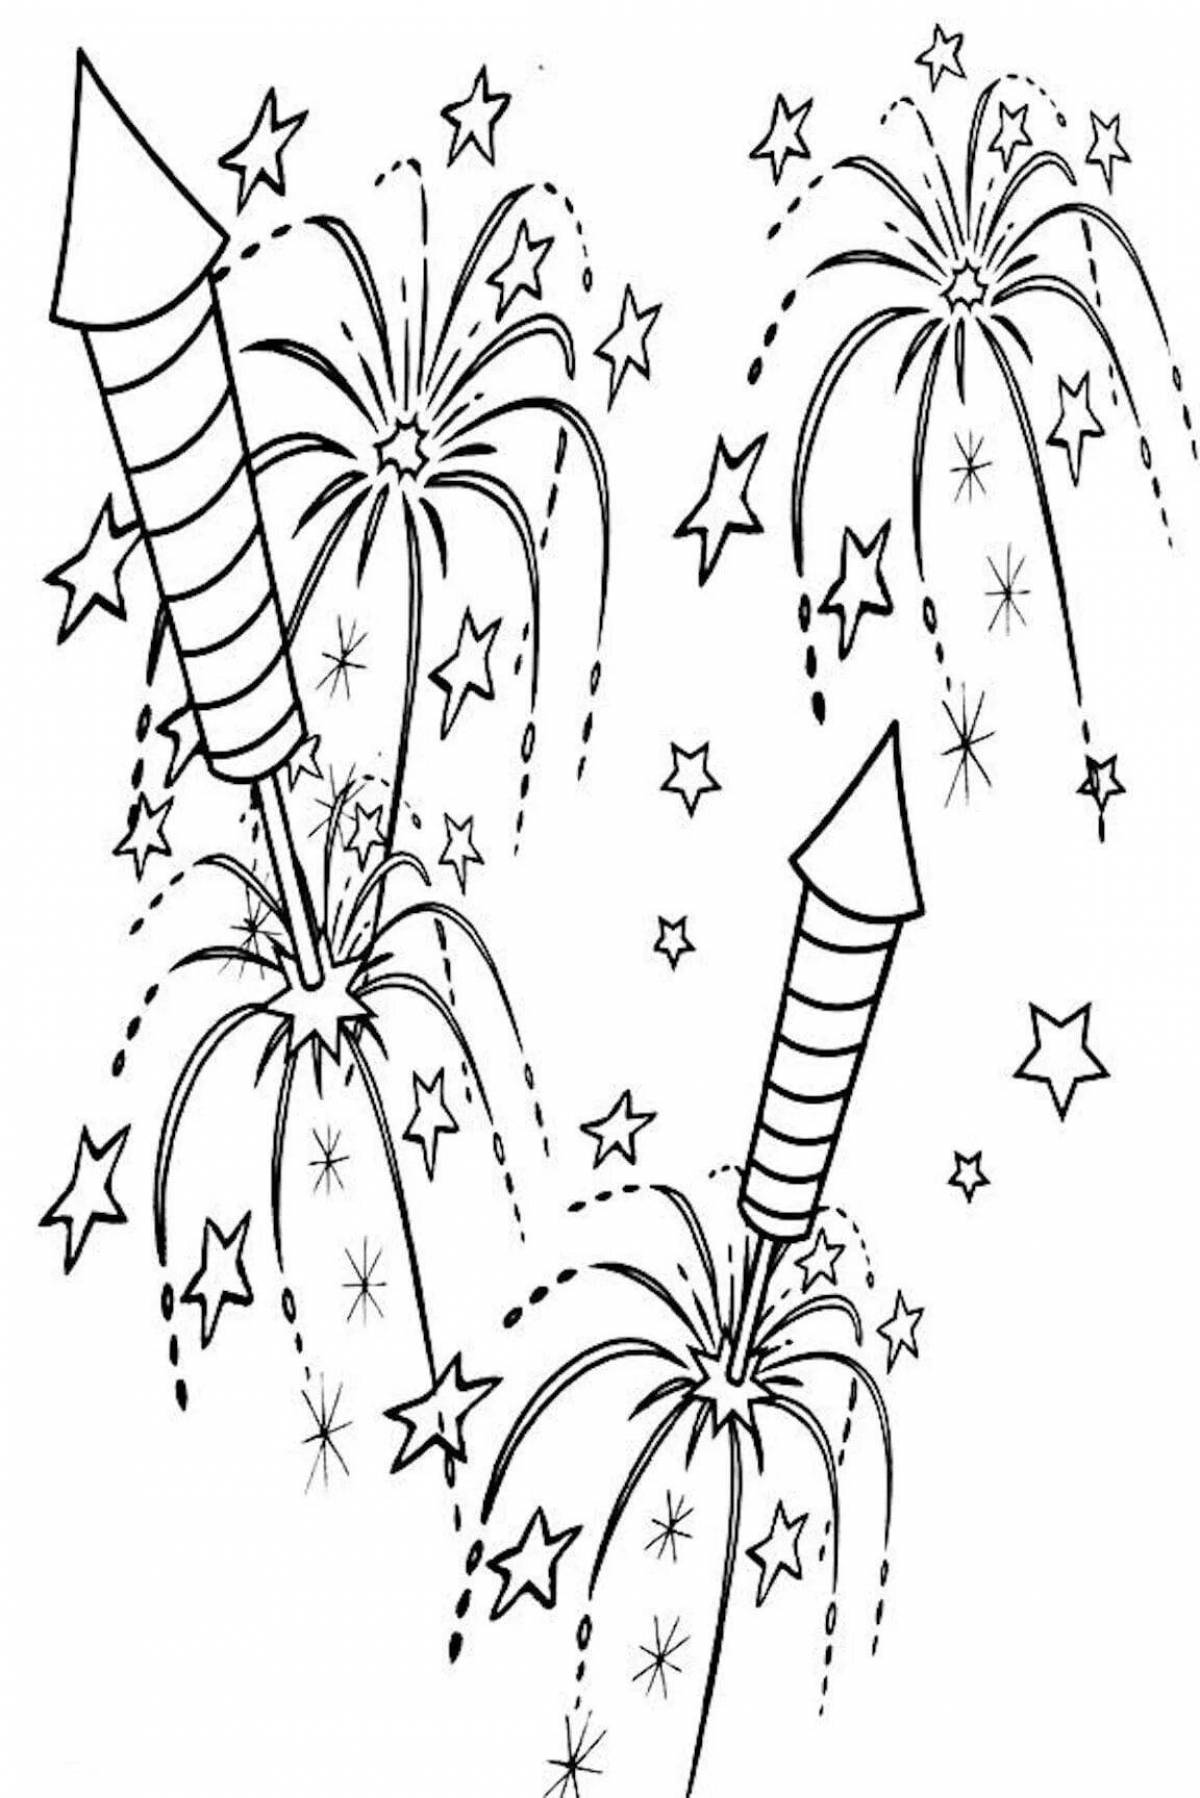 Exquisite Christmas cracker coloring book